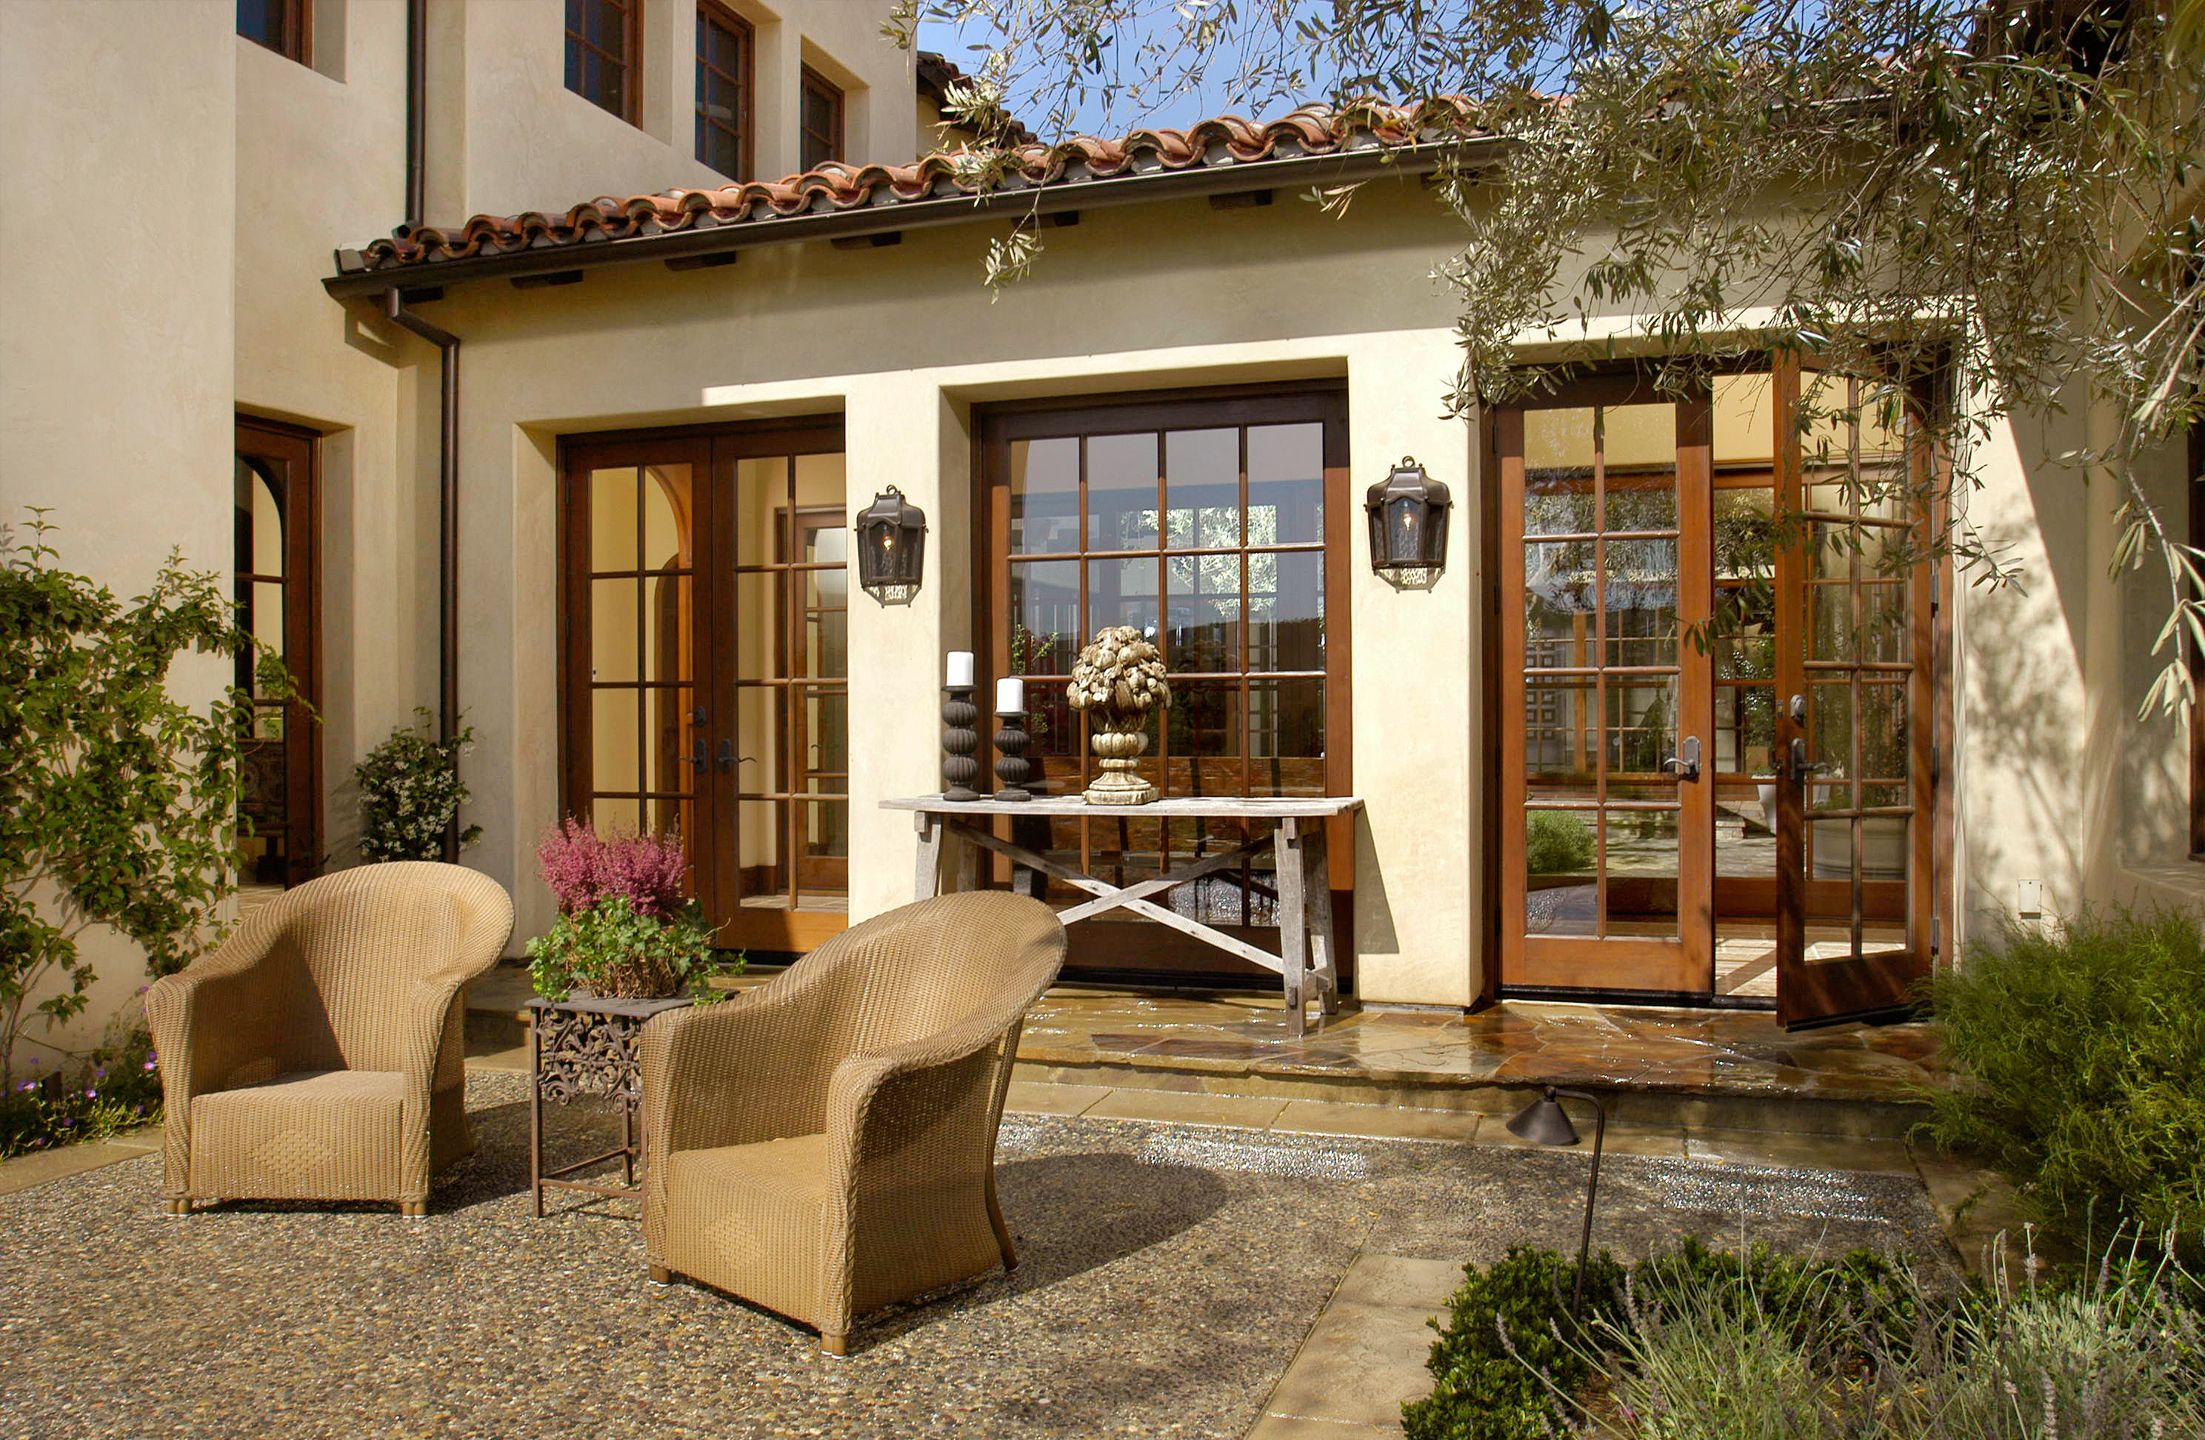 mission revival with french doors